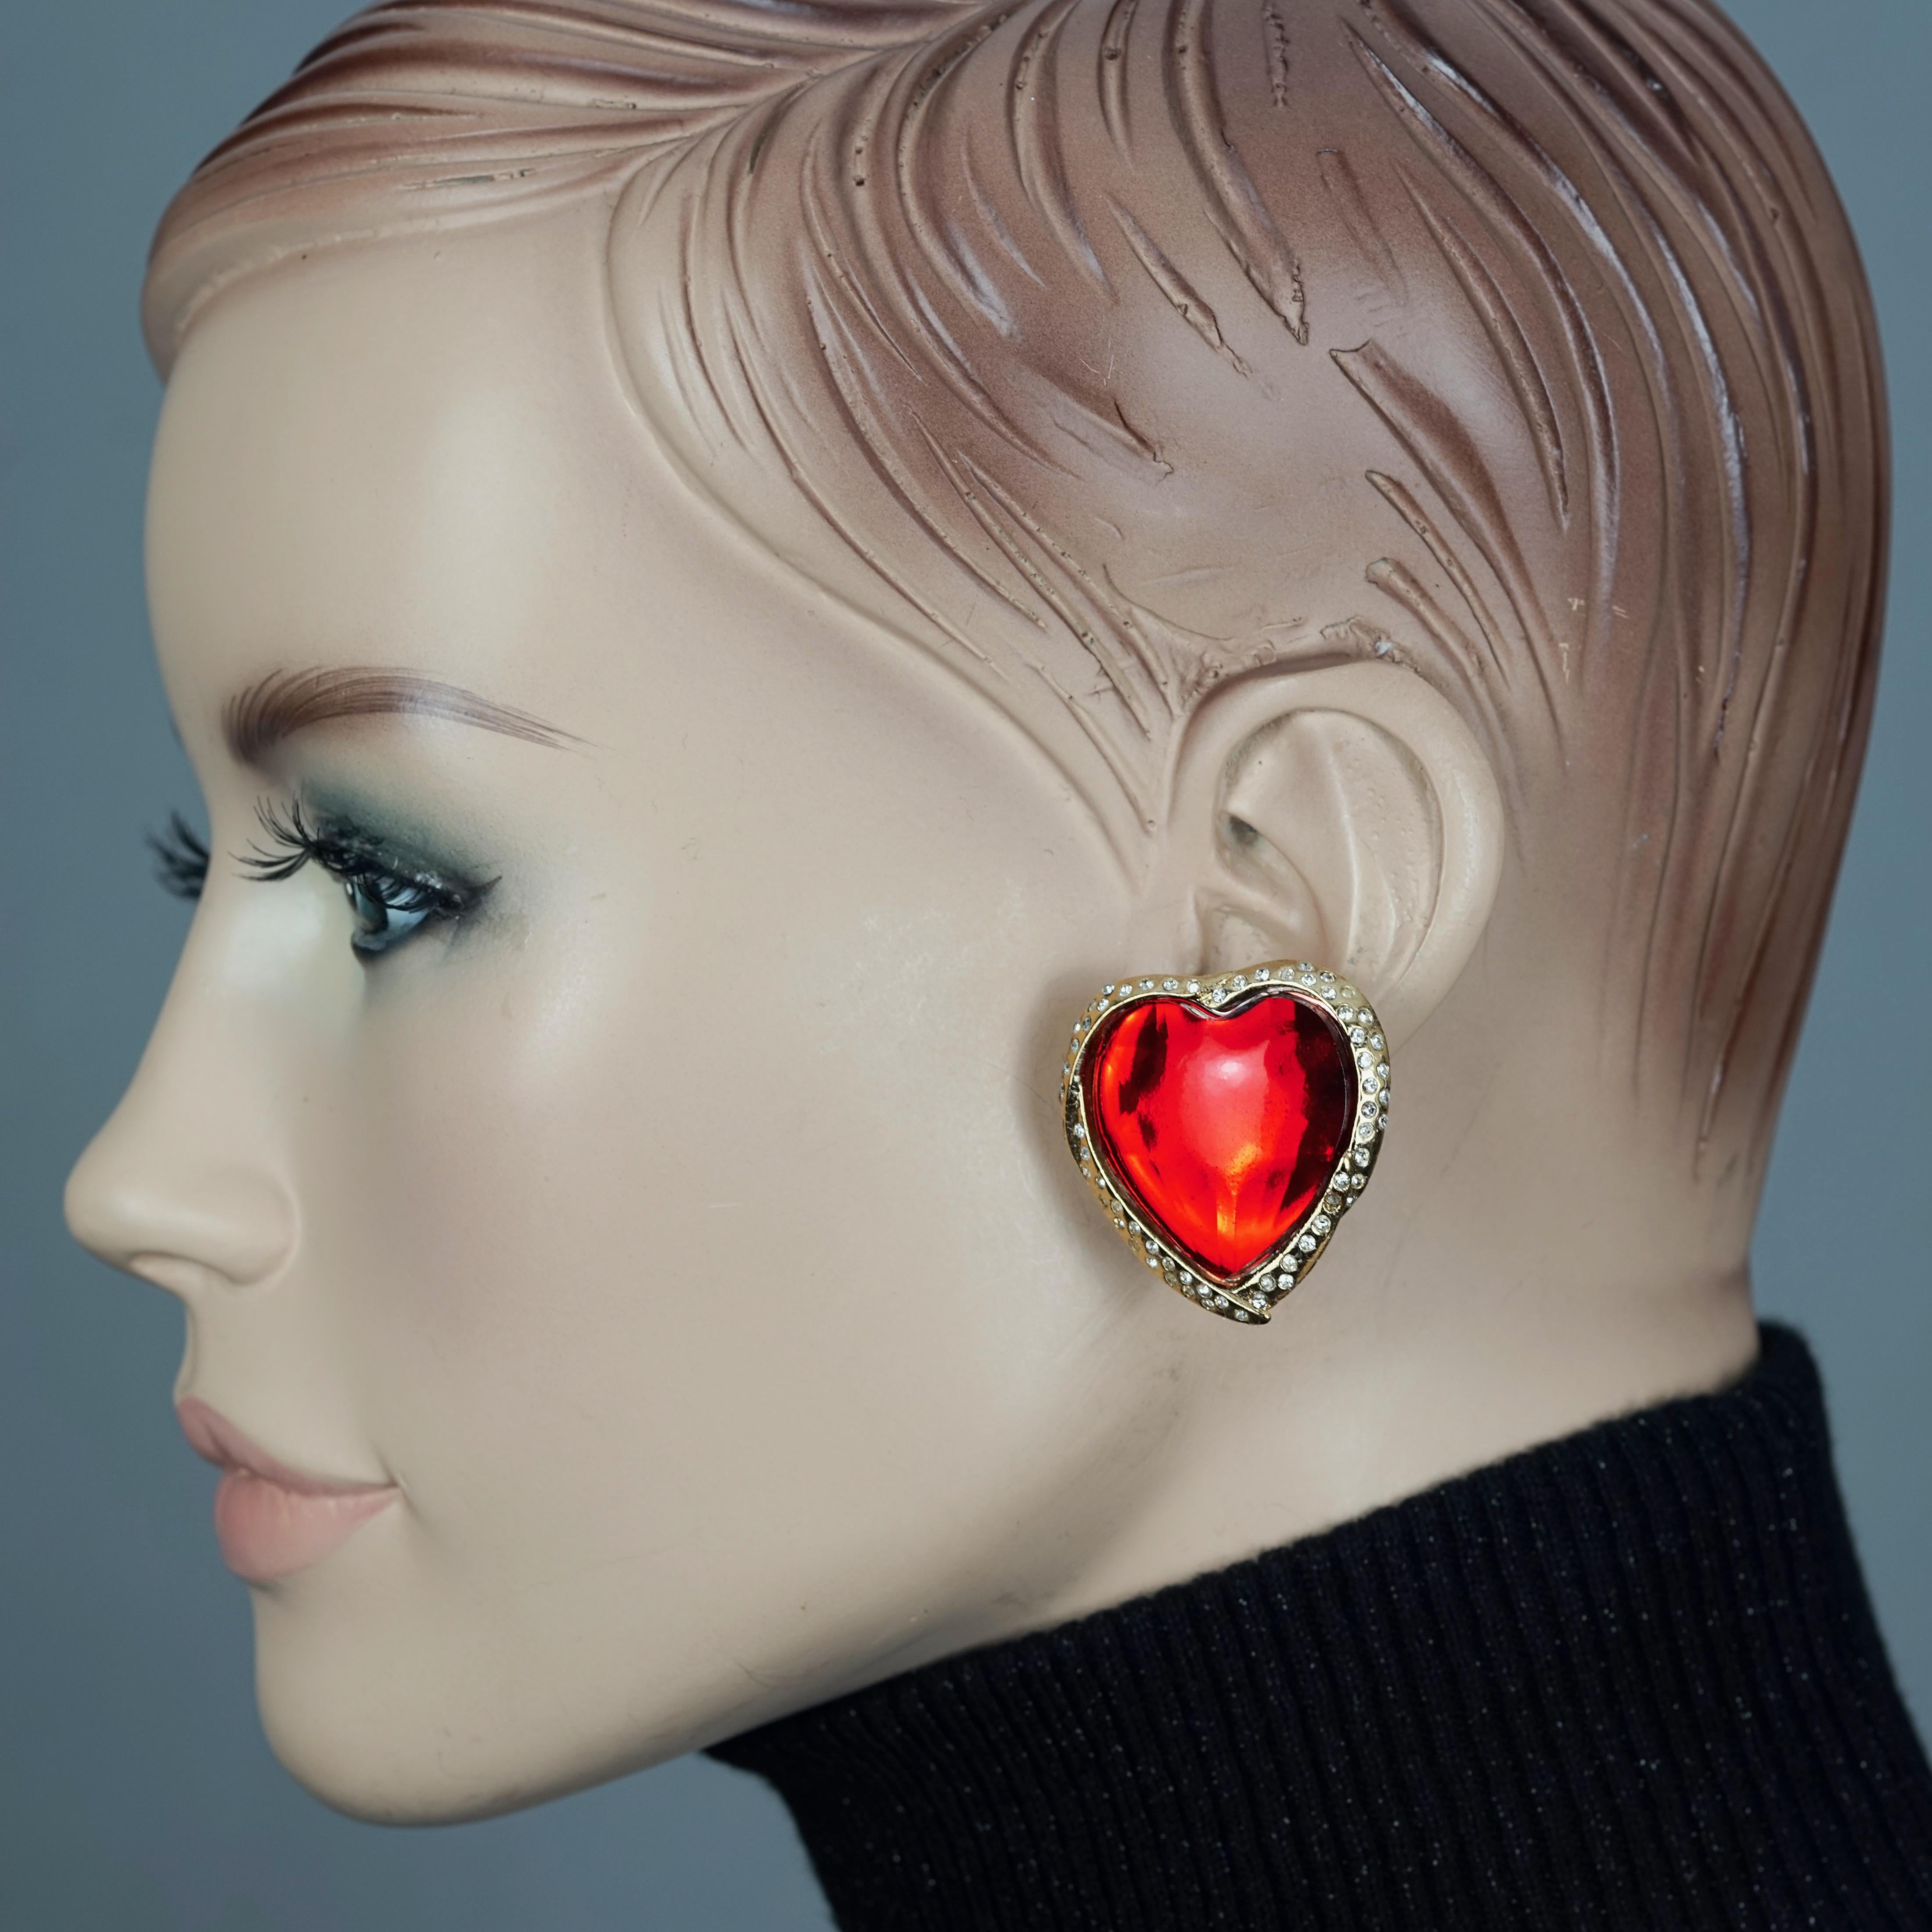 Vintage YVES SAINT LAURENT Ysl Red Faceted Heart Rhinestone Earrings

Measurements:
Height: 1.37 inches (3.5 cm)
Width: 1.30 inches (3.3 cm)
Weight per Earring: 14 grams

Features:
- 100% Authentic YVES SAINT LAURENT.
- Raised faceted red heart